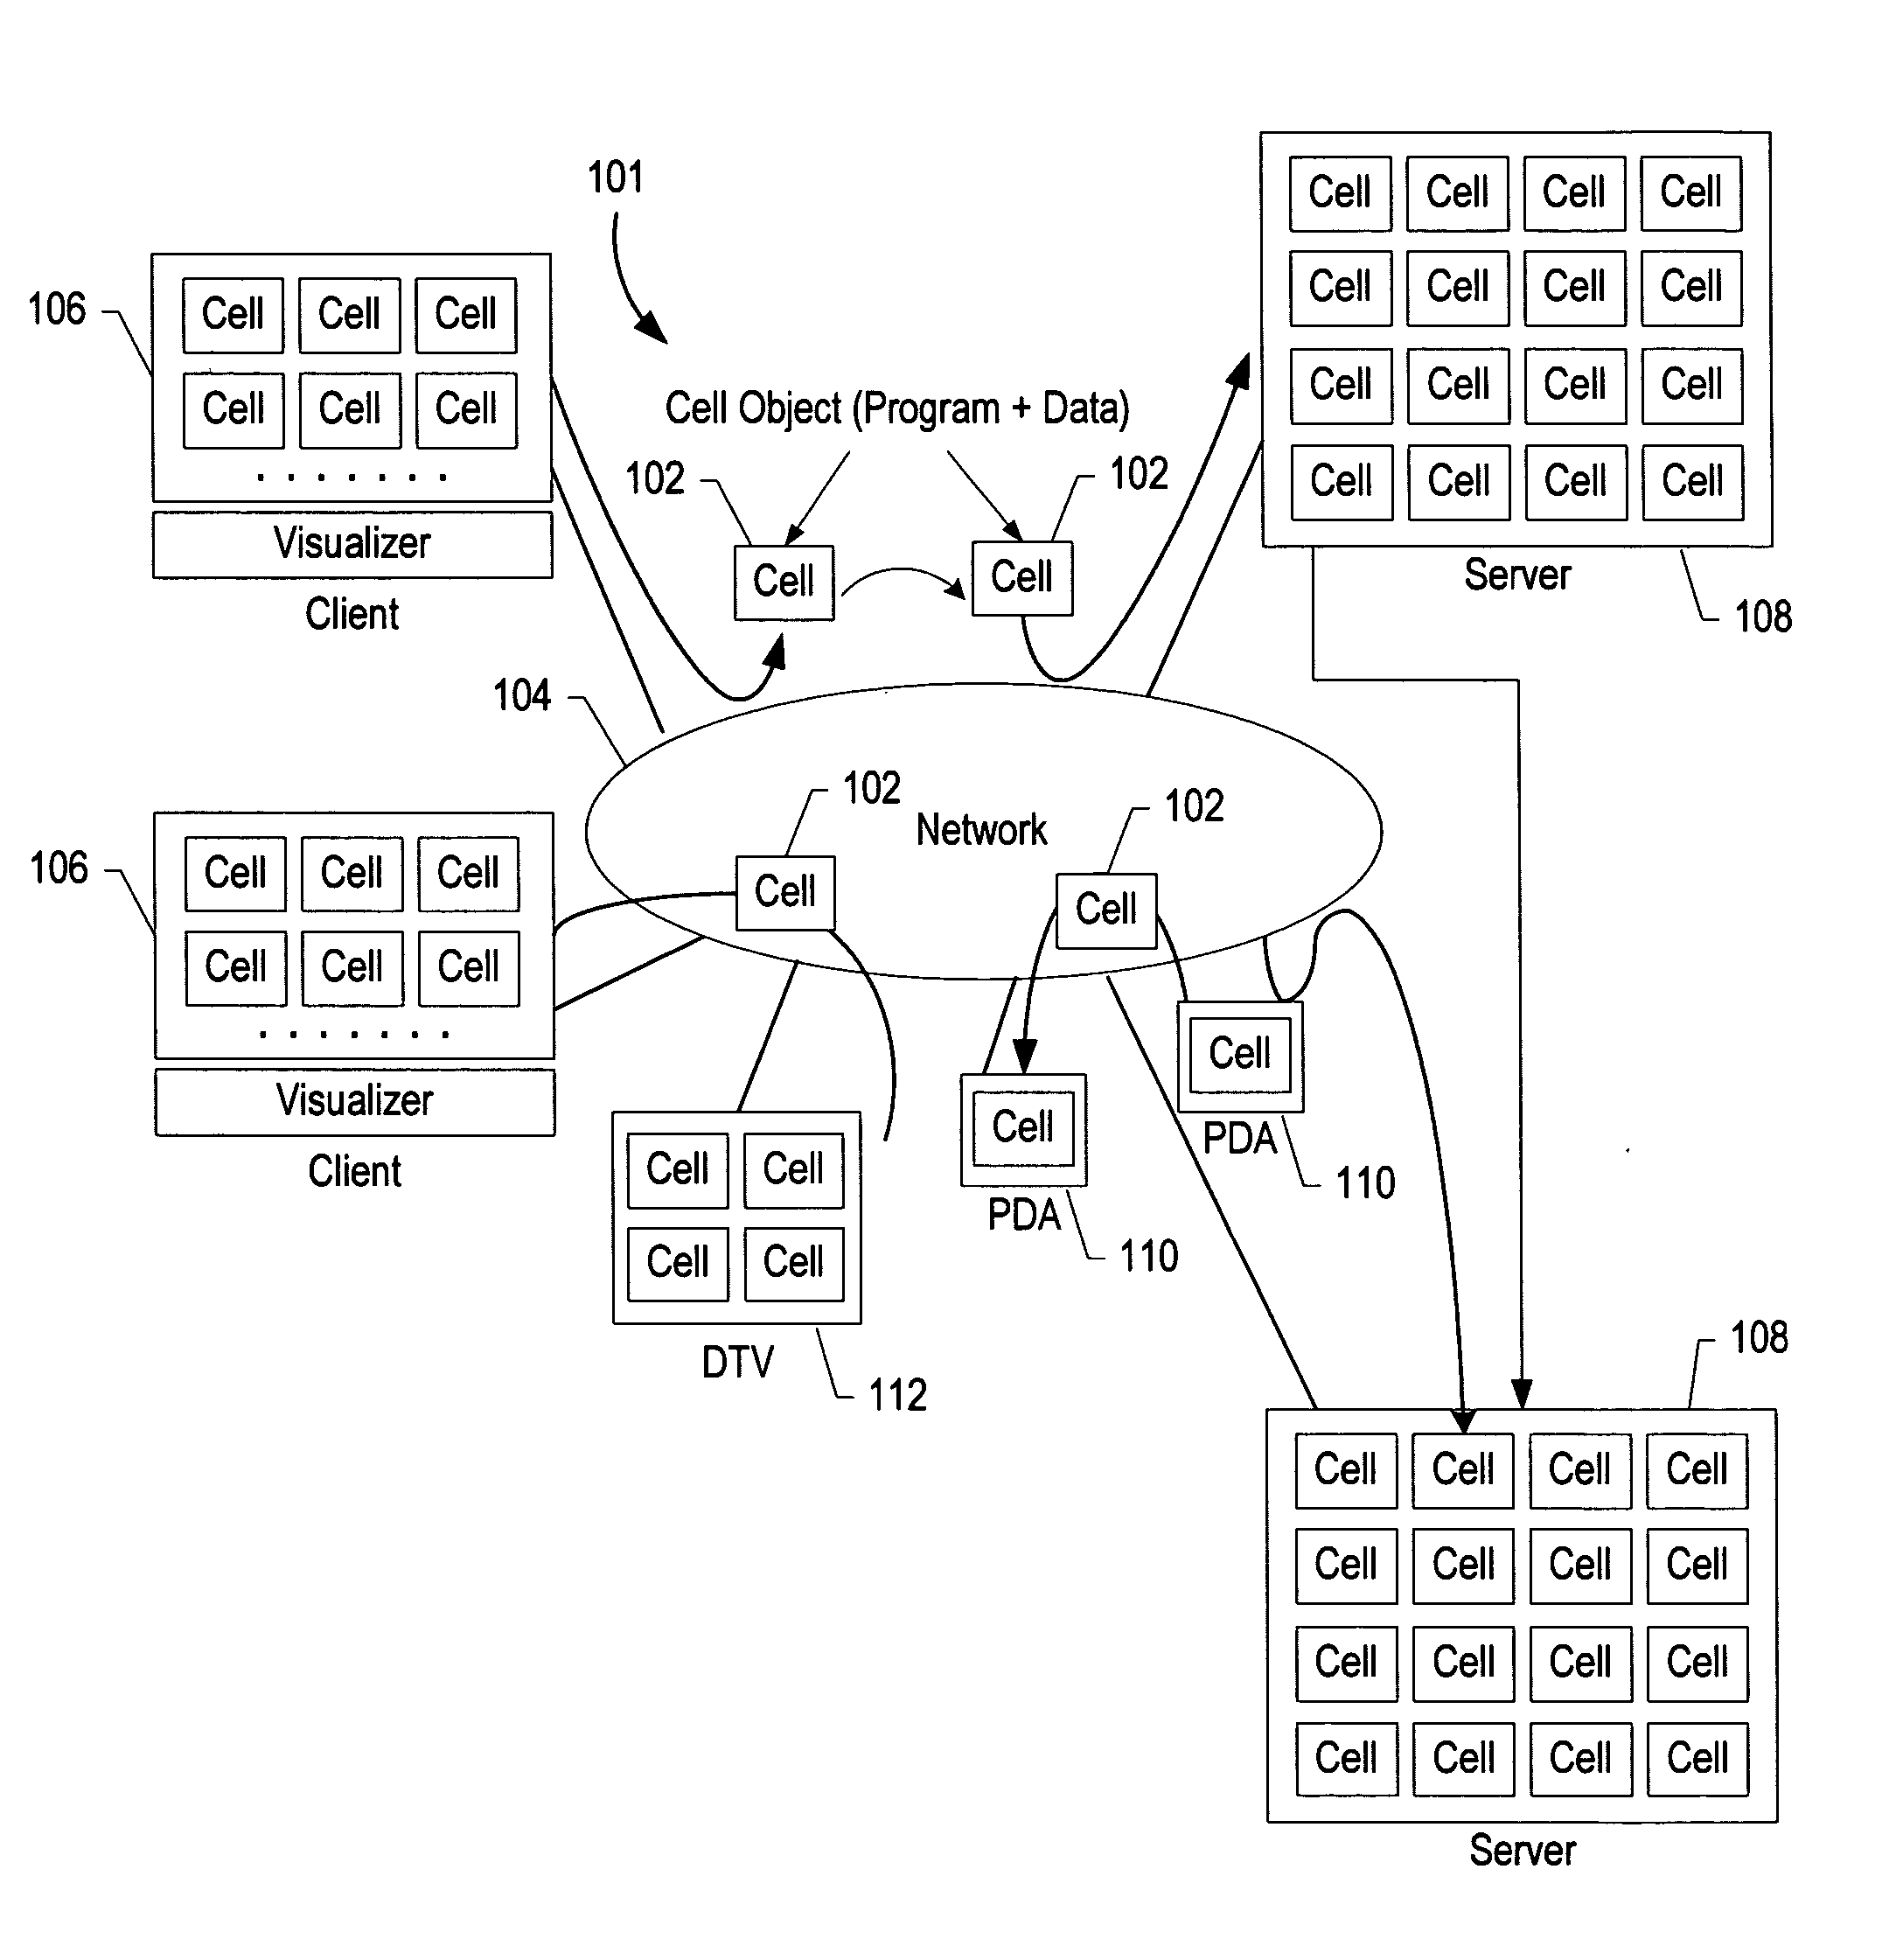 System and method for dynamically partitioning processing across plurality of heterogeneous processors